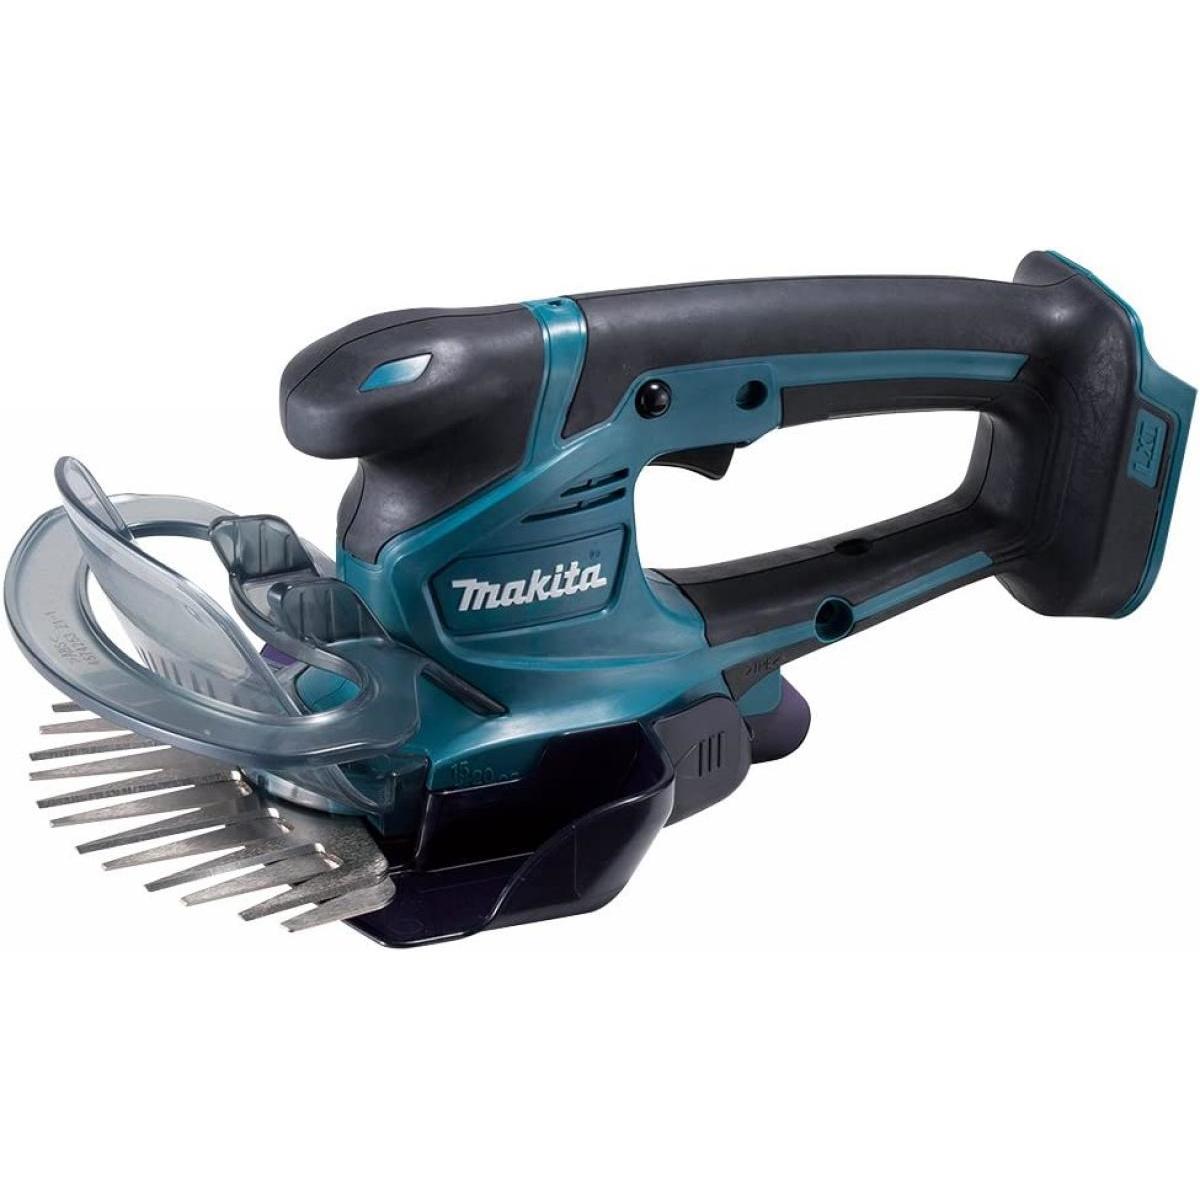 [ stock have * immediate payment ] Makita lawn grass raw barber's clippers barber's clippers lawn grass raw siba lawn grass ...si buffing barber's clippers rechargeable 18V. included width 160mm battery charger optional MUM604DZ